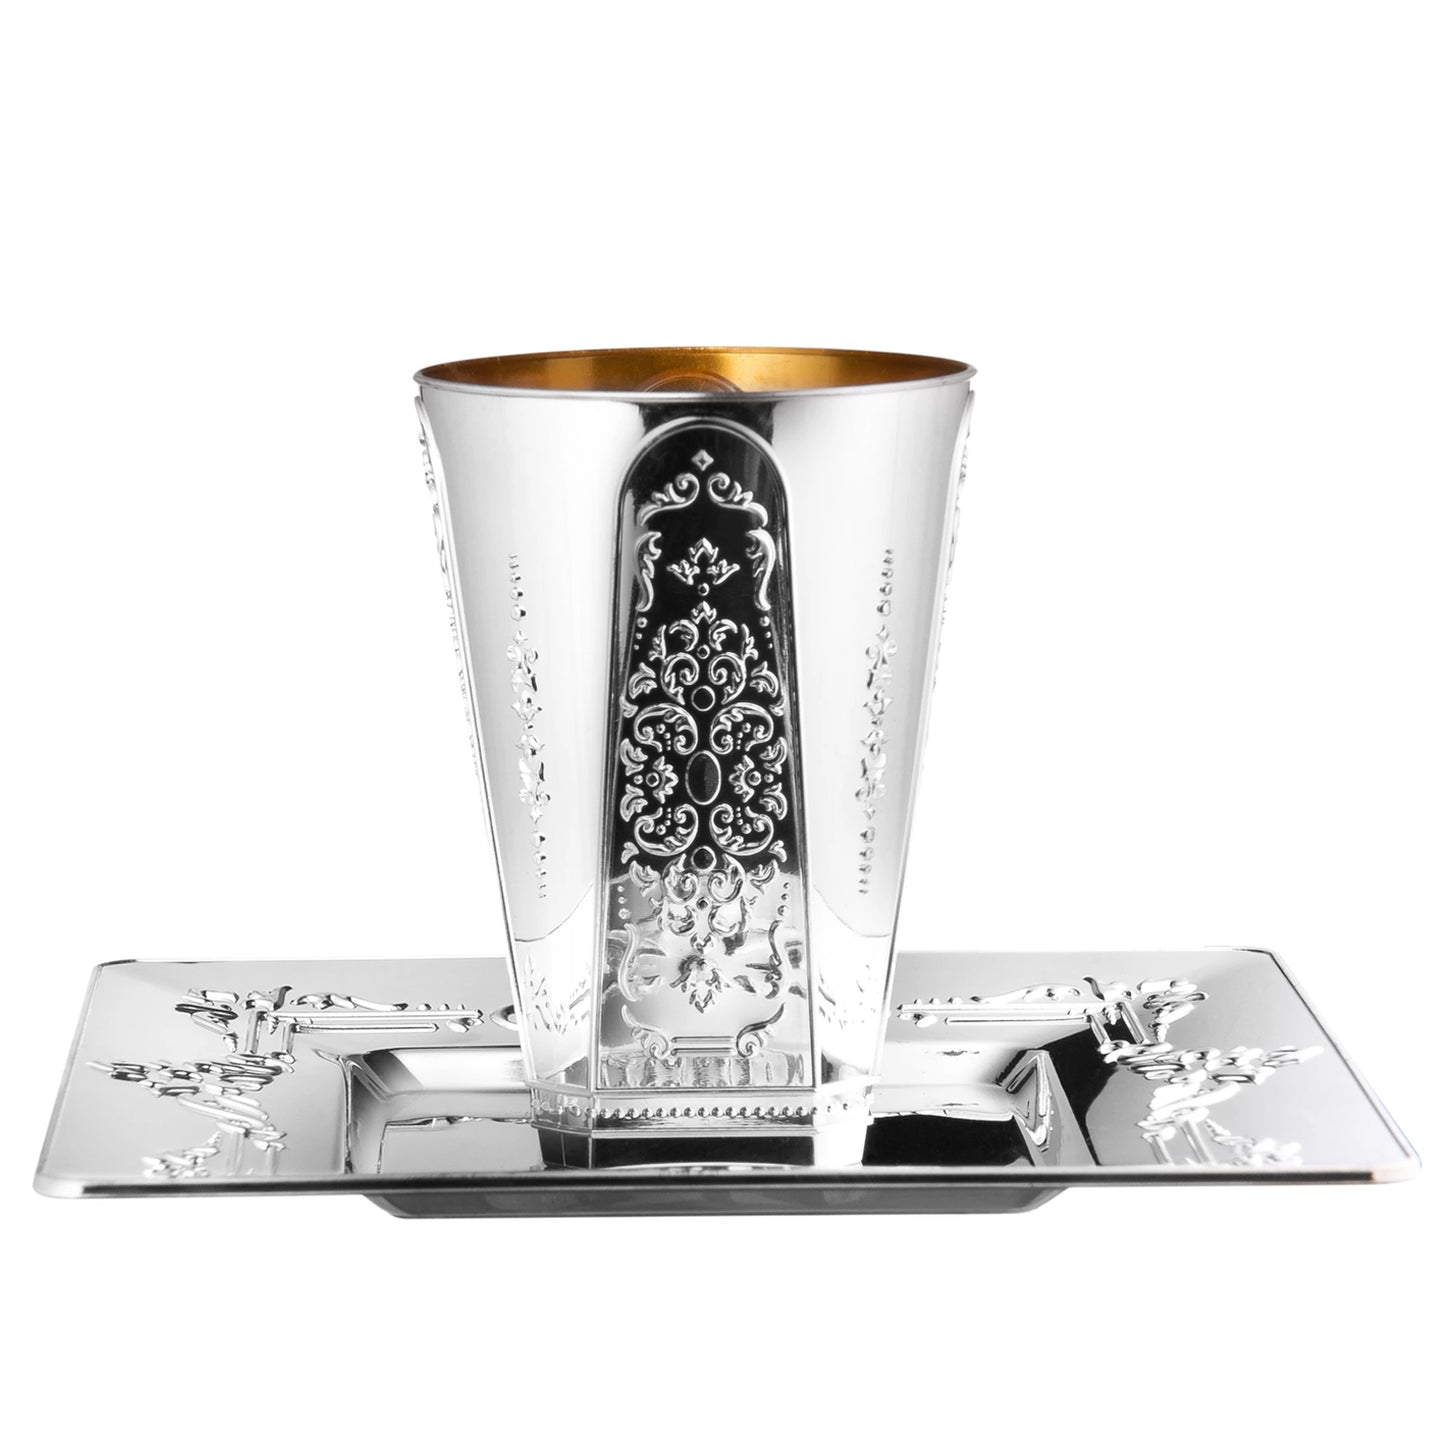 Regal Square Wine Kiddush Cup with Trays 5 oz Tablesettings Decorline   